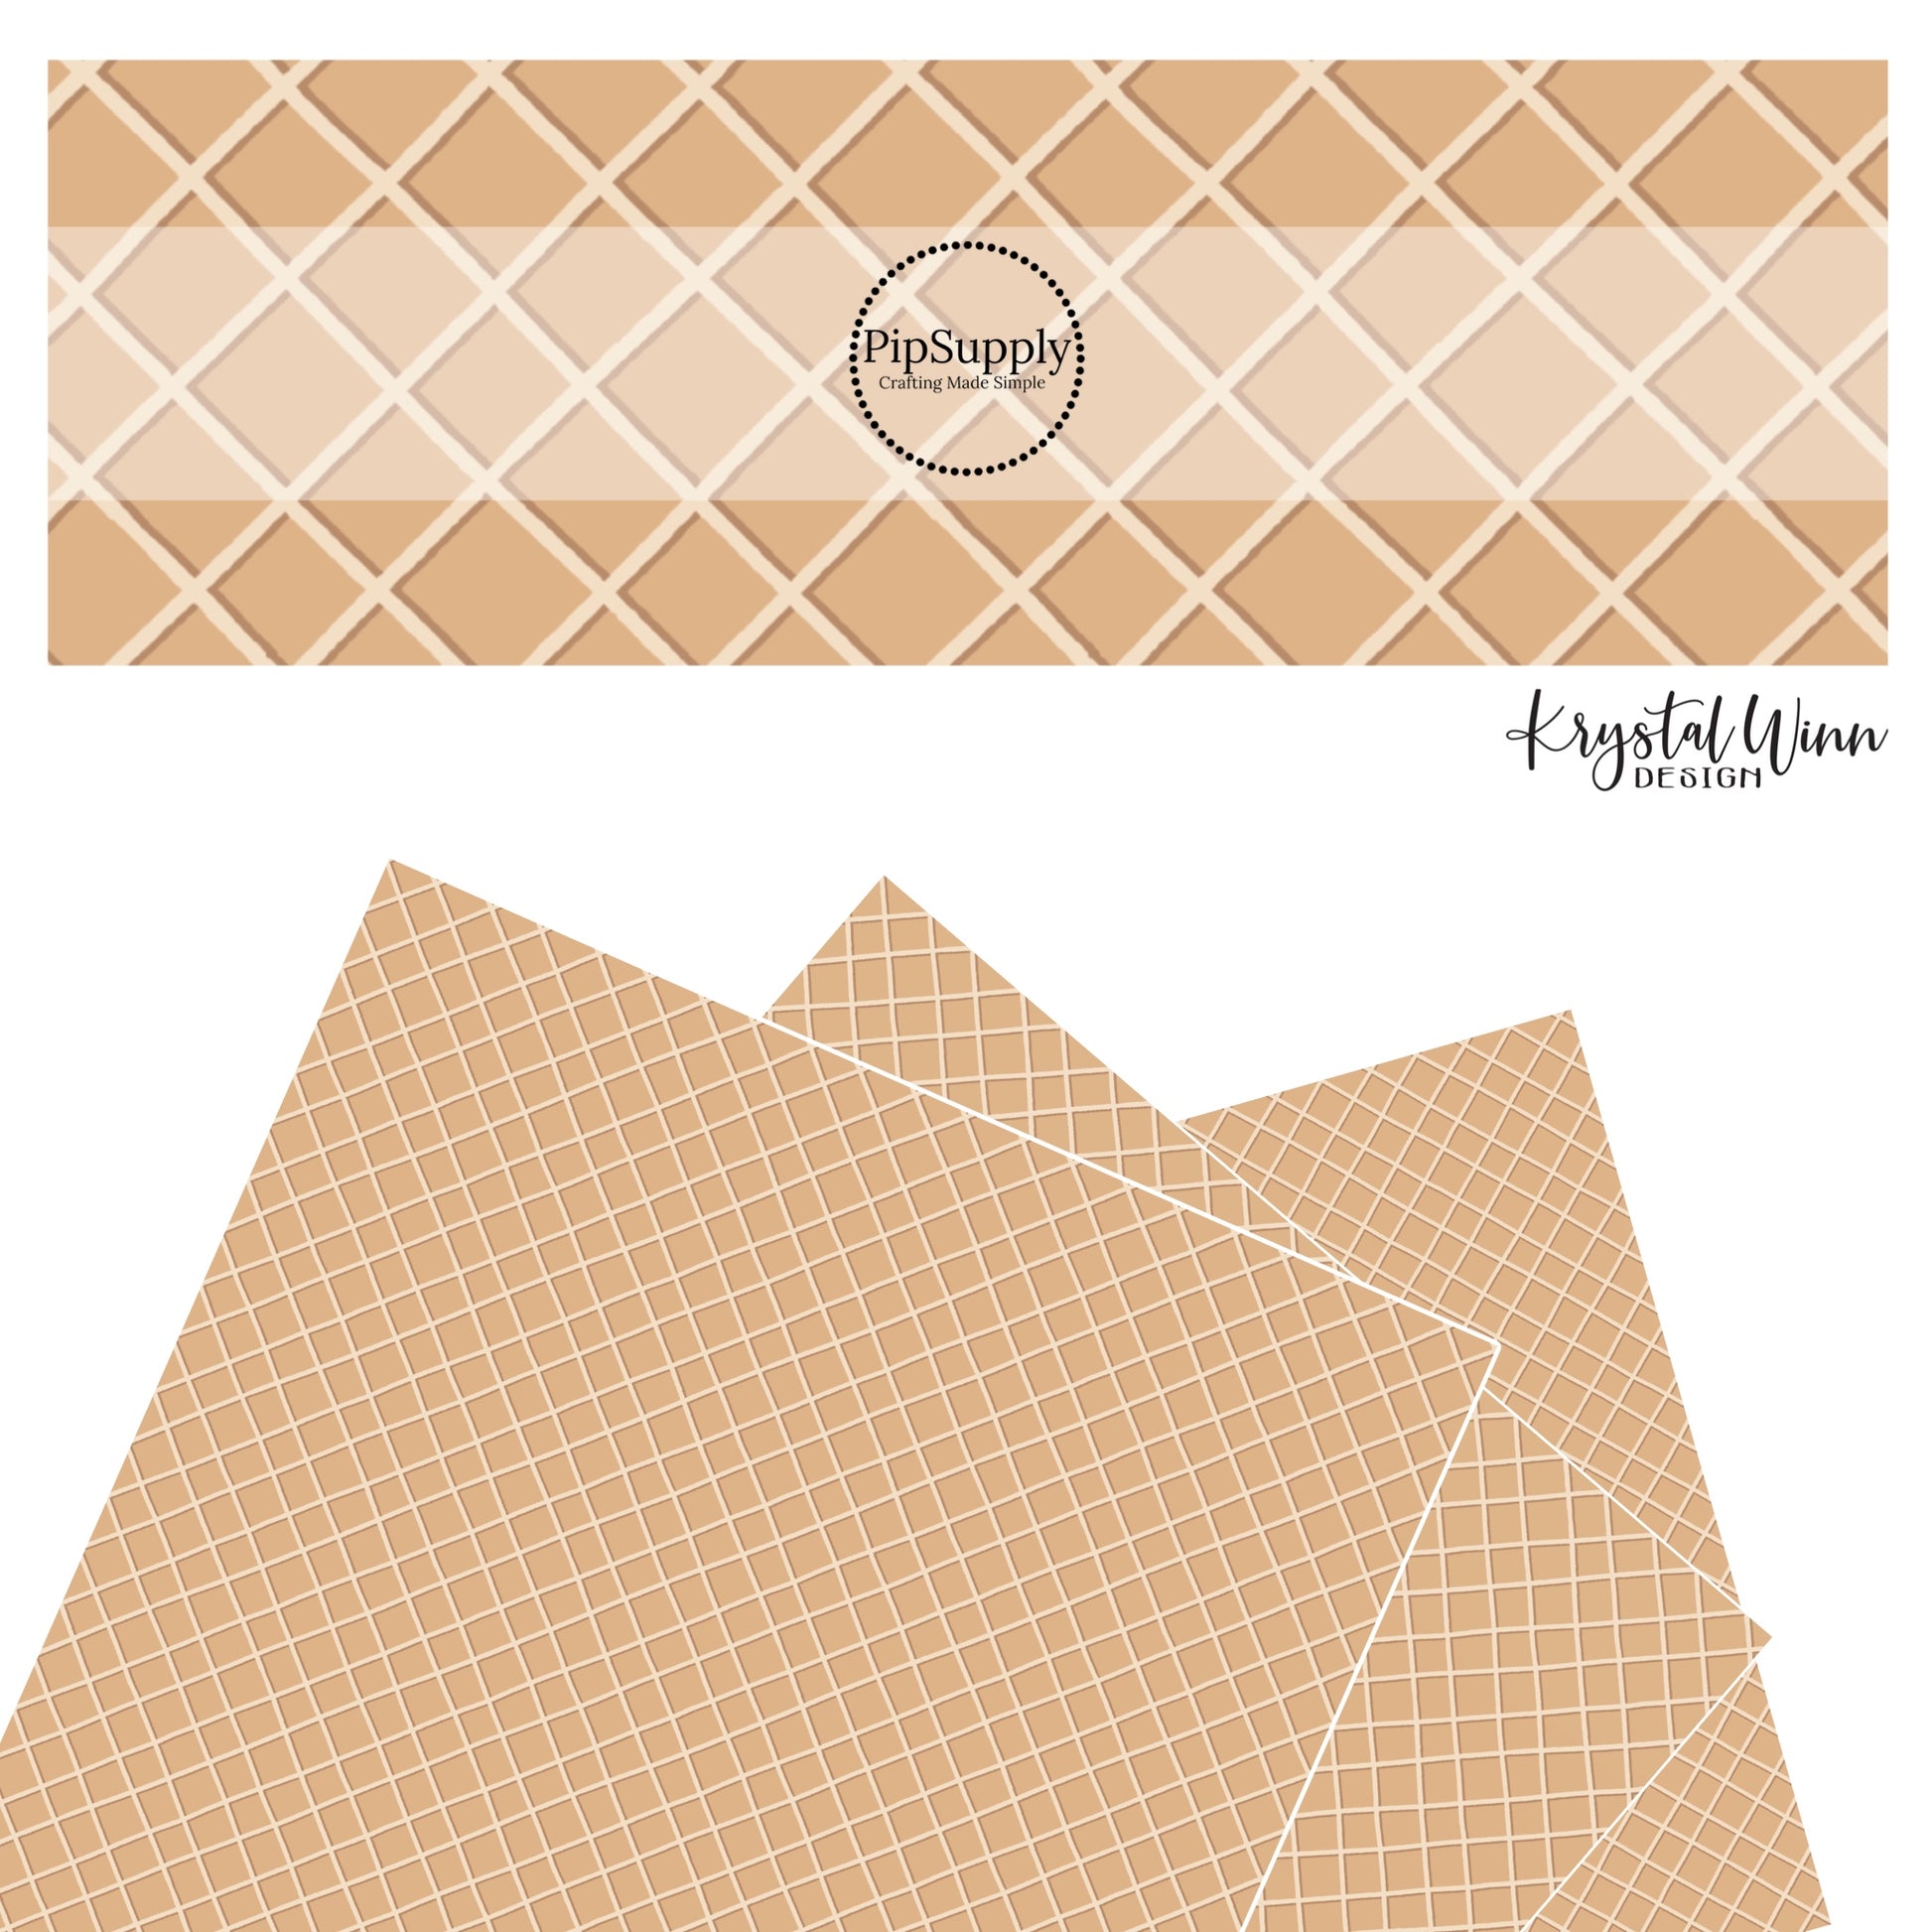 These dessert themed cream faux leather sheets contain the following design elements: ice cream cone pattern. Our CPSIA compliant faux leather sheets or rolls can be used for all types of crafting projects.